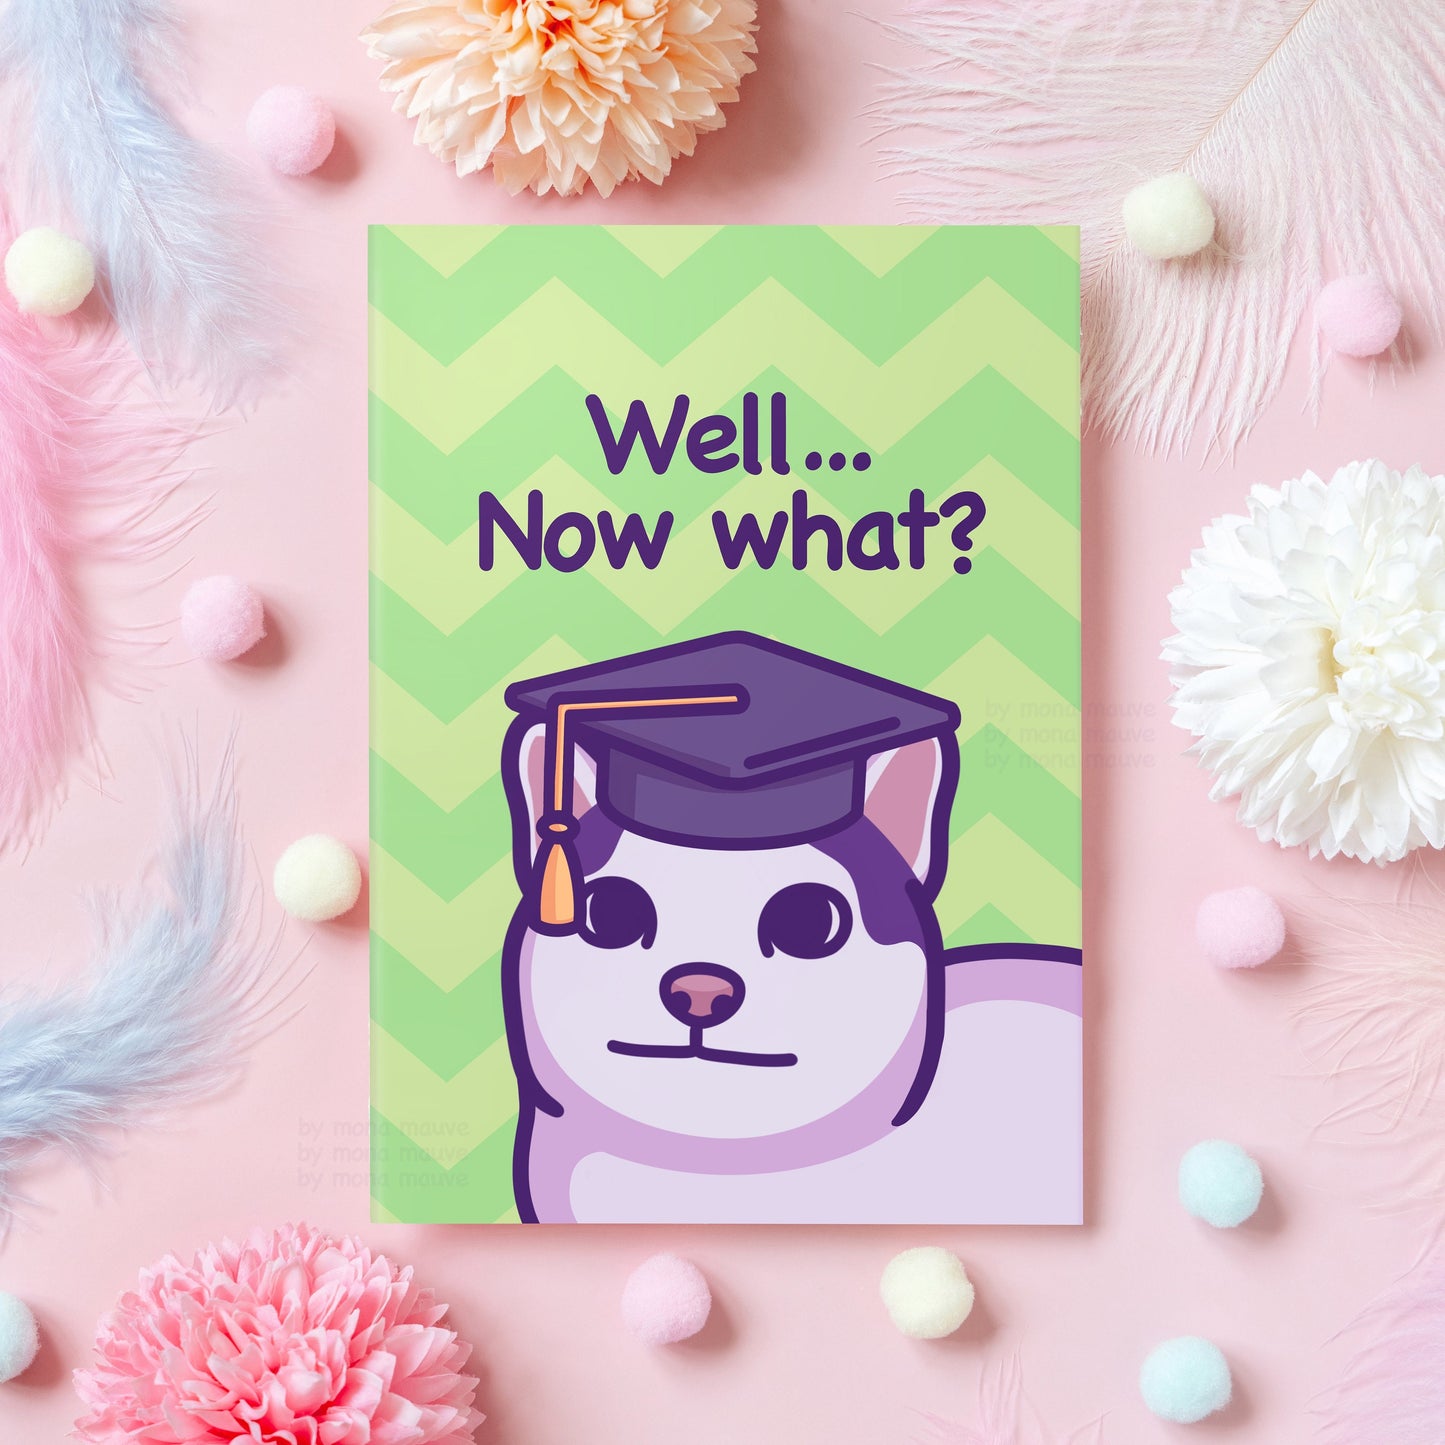 Funny Cat Graduation Card | Well, Now What? | Meme Gift for School or University Graduation | End of School Congratulations - Her or Him